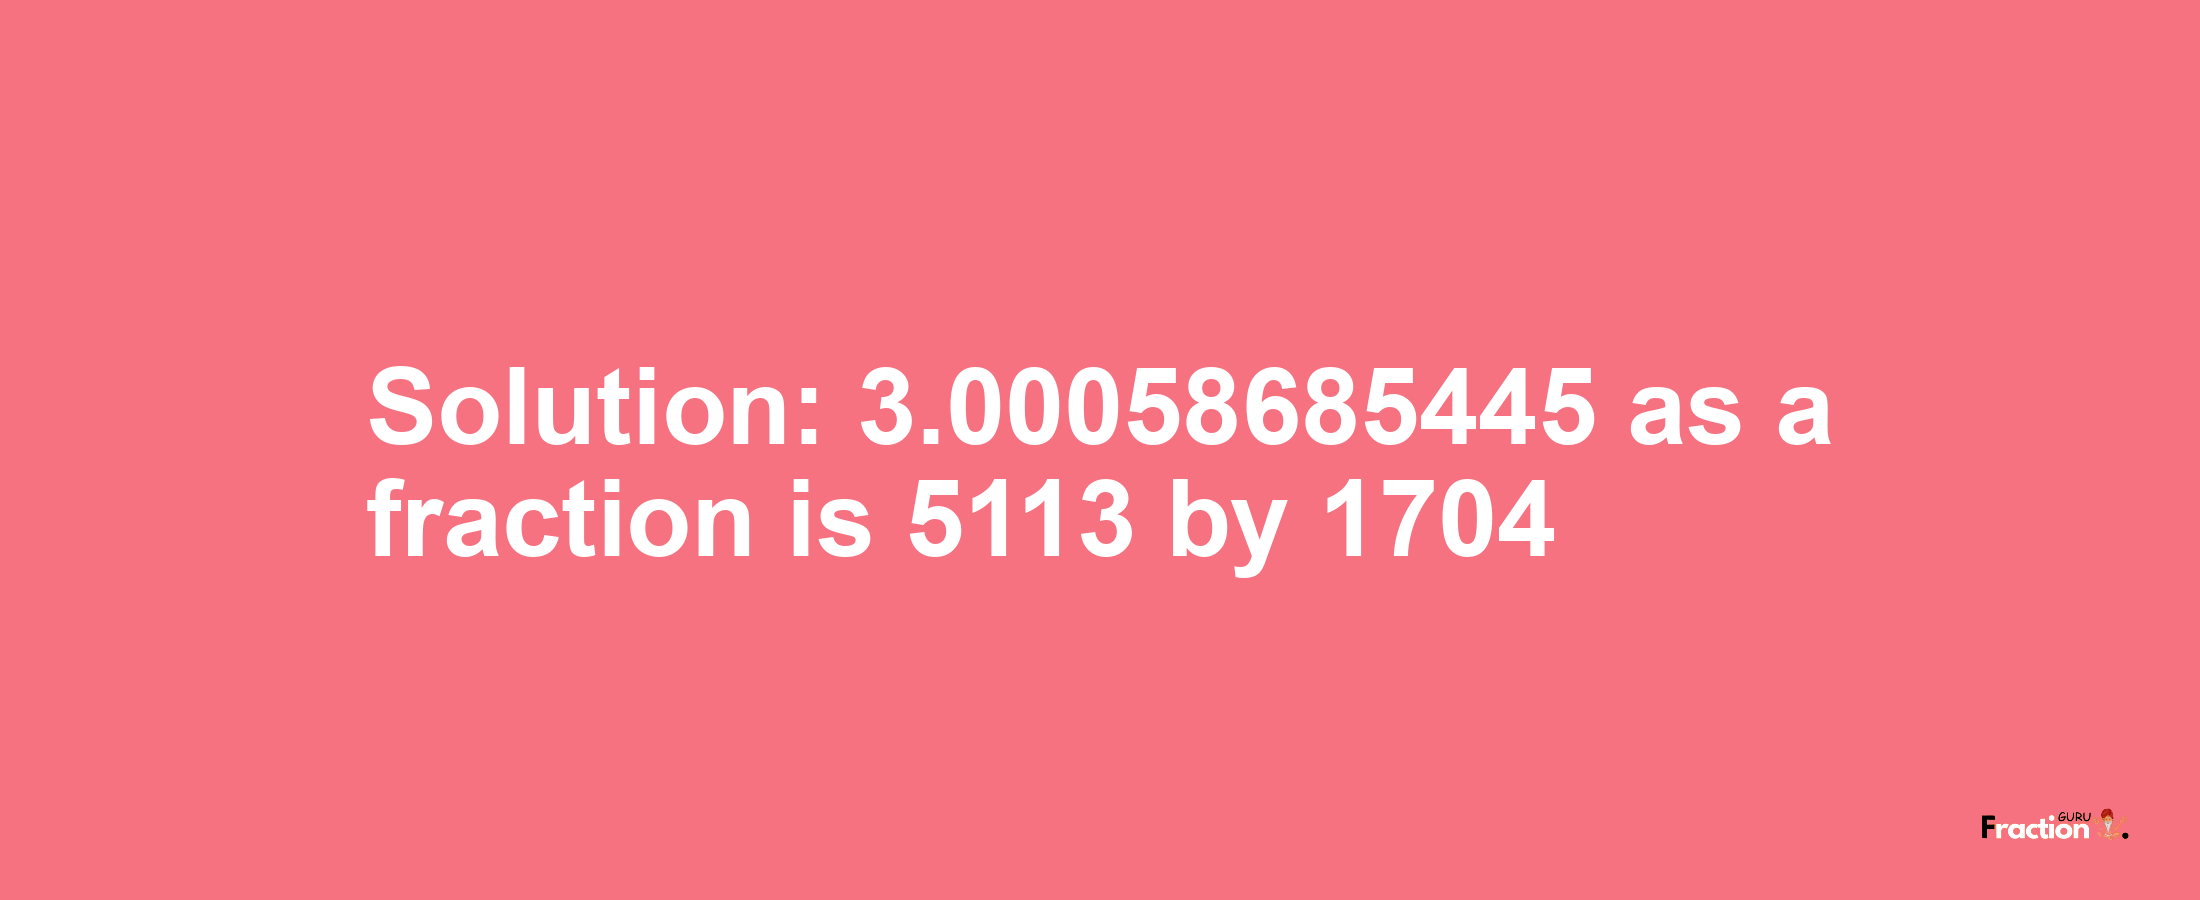 Solution:3.00058685445 as a fraction is 5113/1704